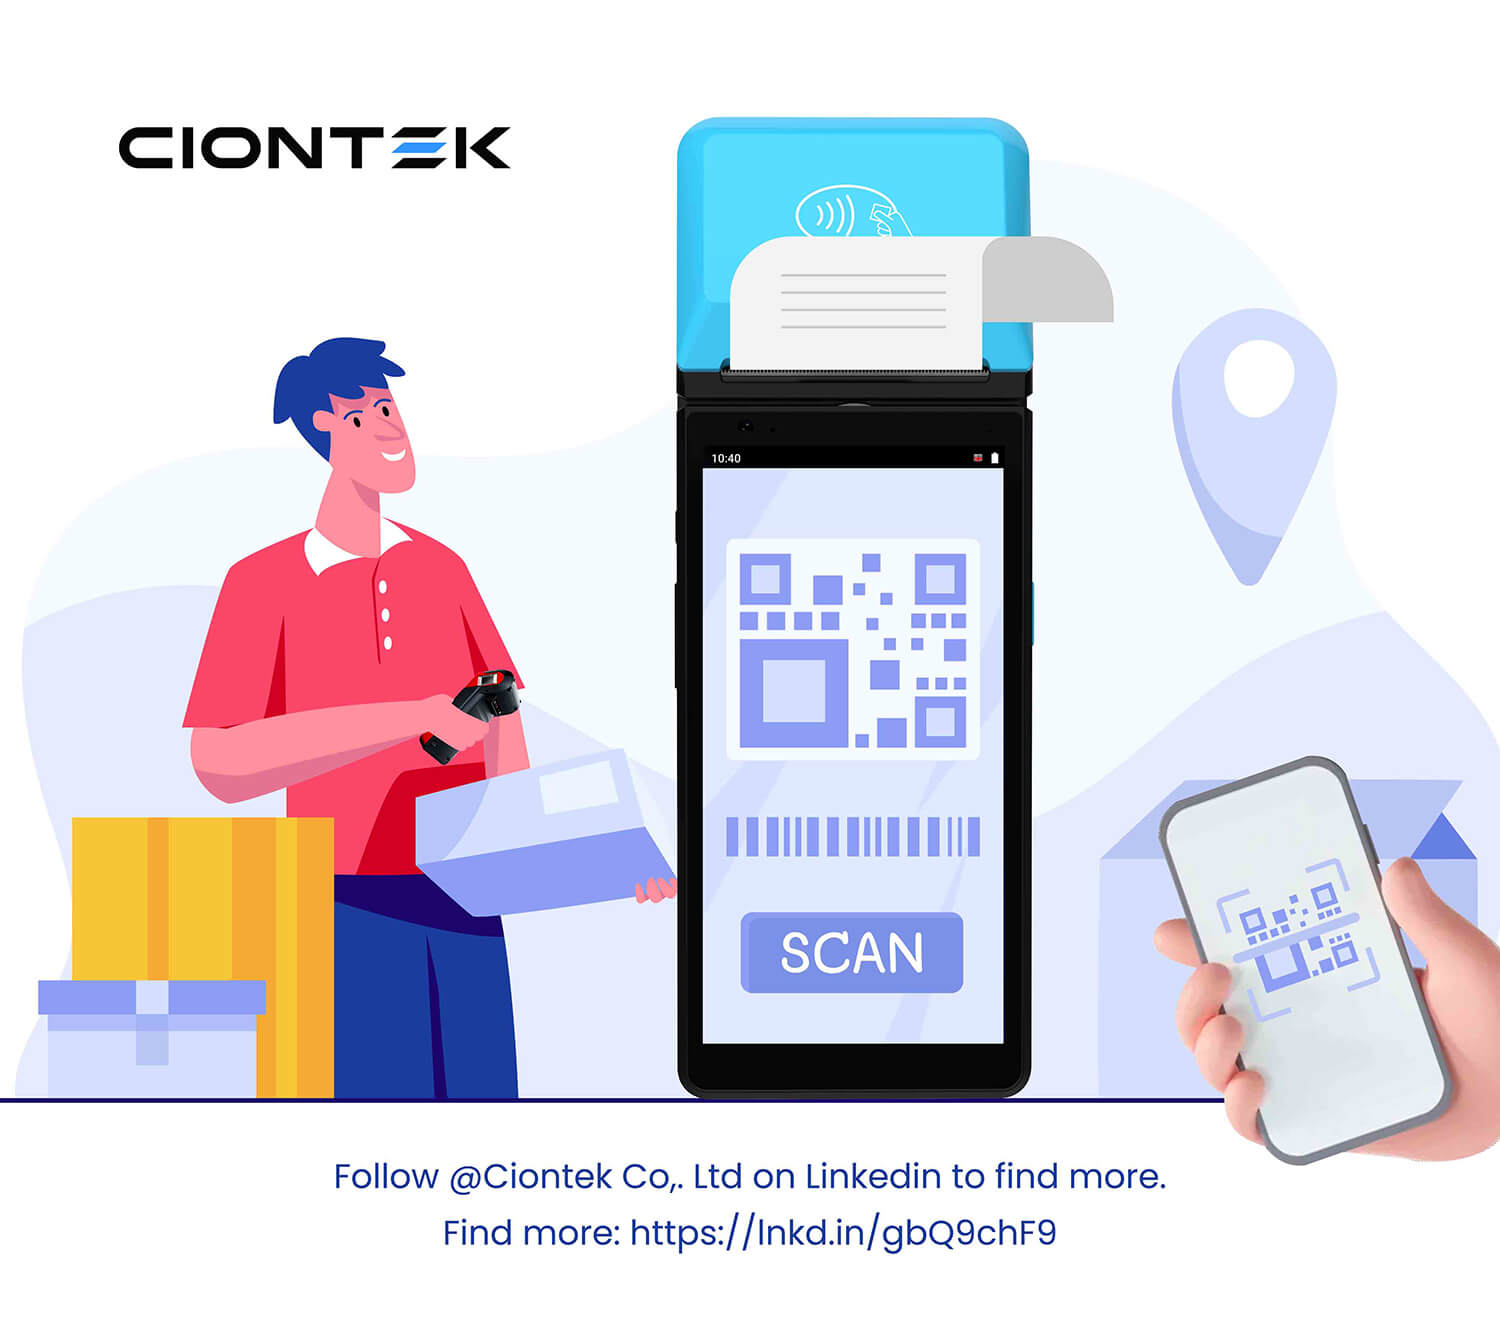 Qr Codes: The Future Of Mobile Payment Systems?|CIONTEK